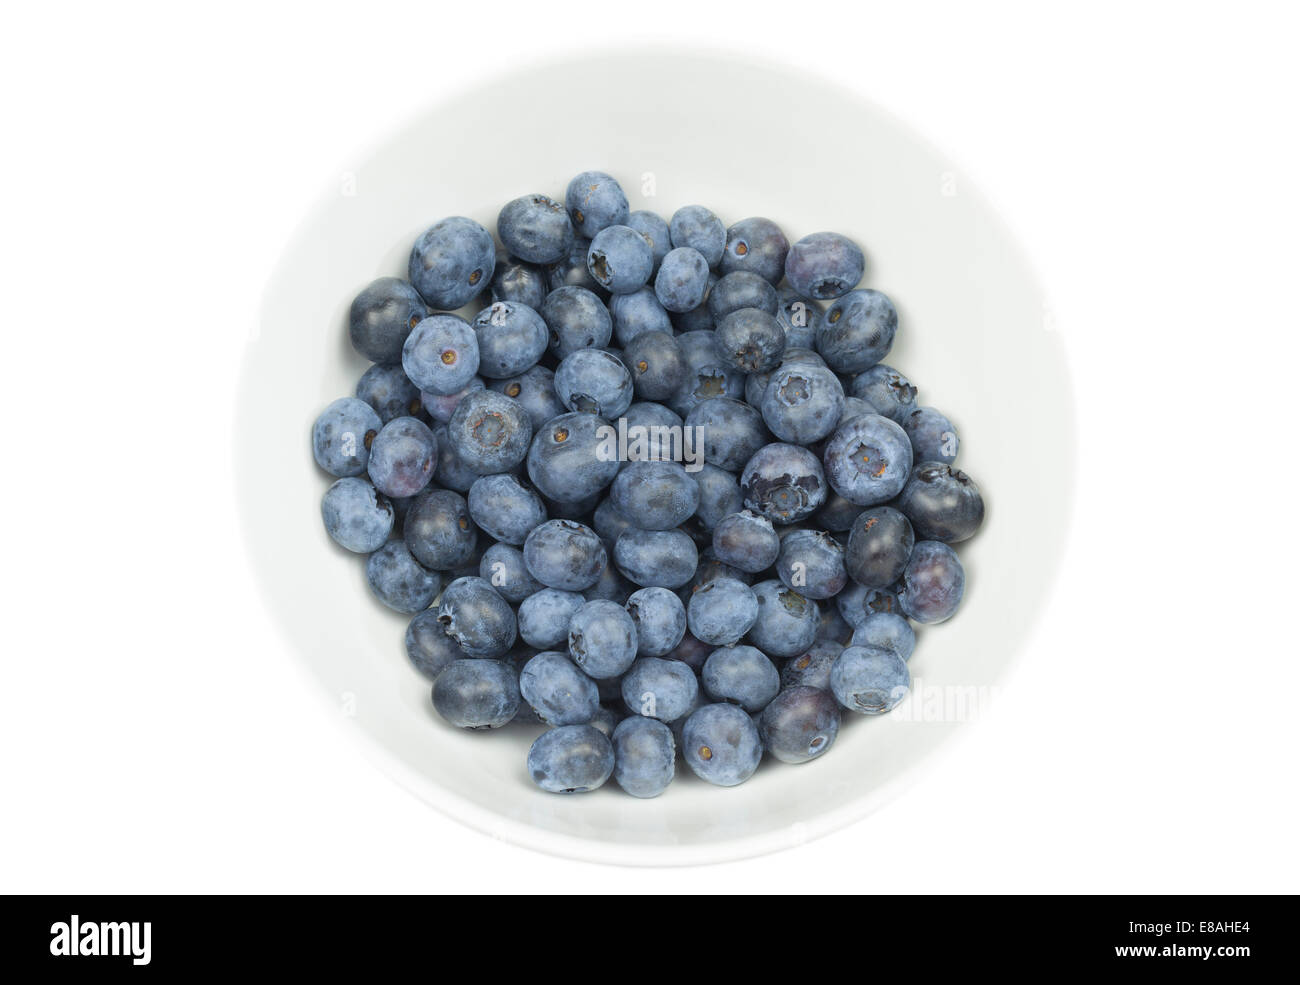 Blueberries in a bowl isolated on a white background Stock Photo